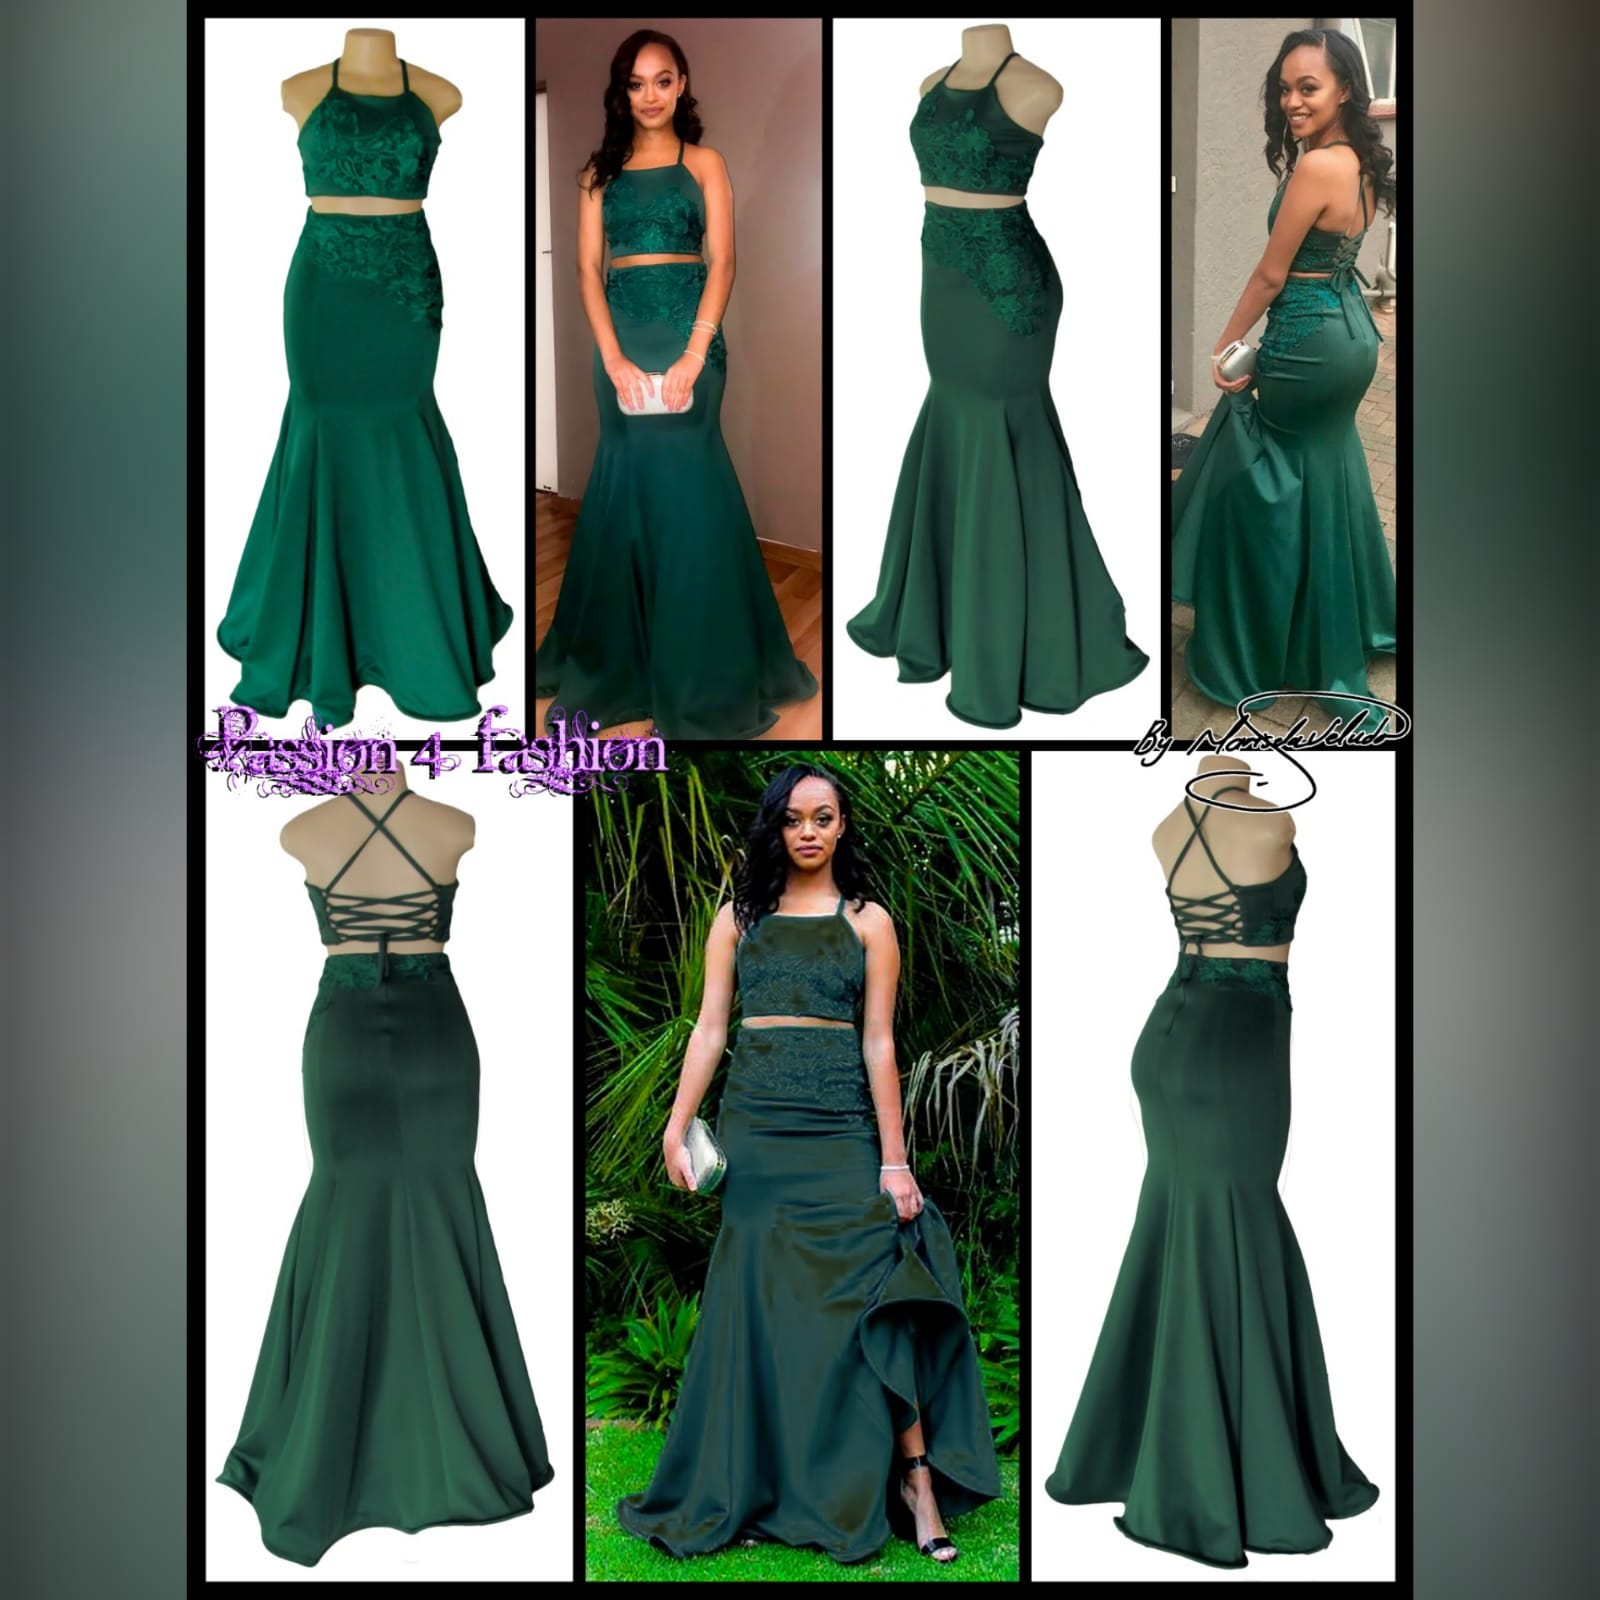 2 piece emerald green mermaid matric dance dress 7 2 piece emerald green mermaid matric dance dress. A gorgeous crop top with a lace-up open back, with a mermaid skirt. Lace detail on skirt and top for a classic touch.